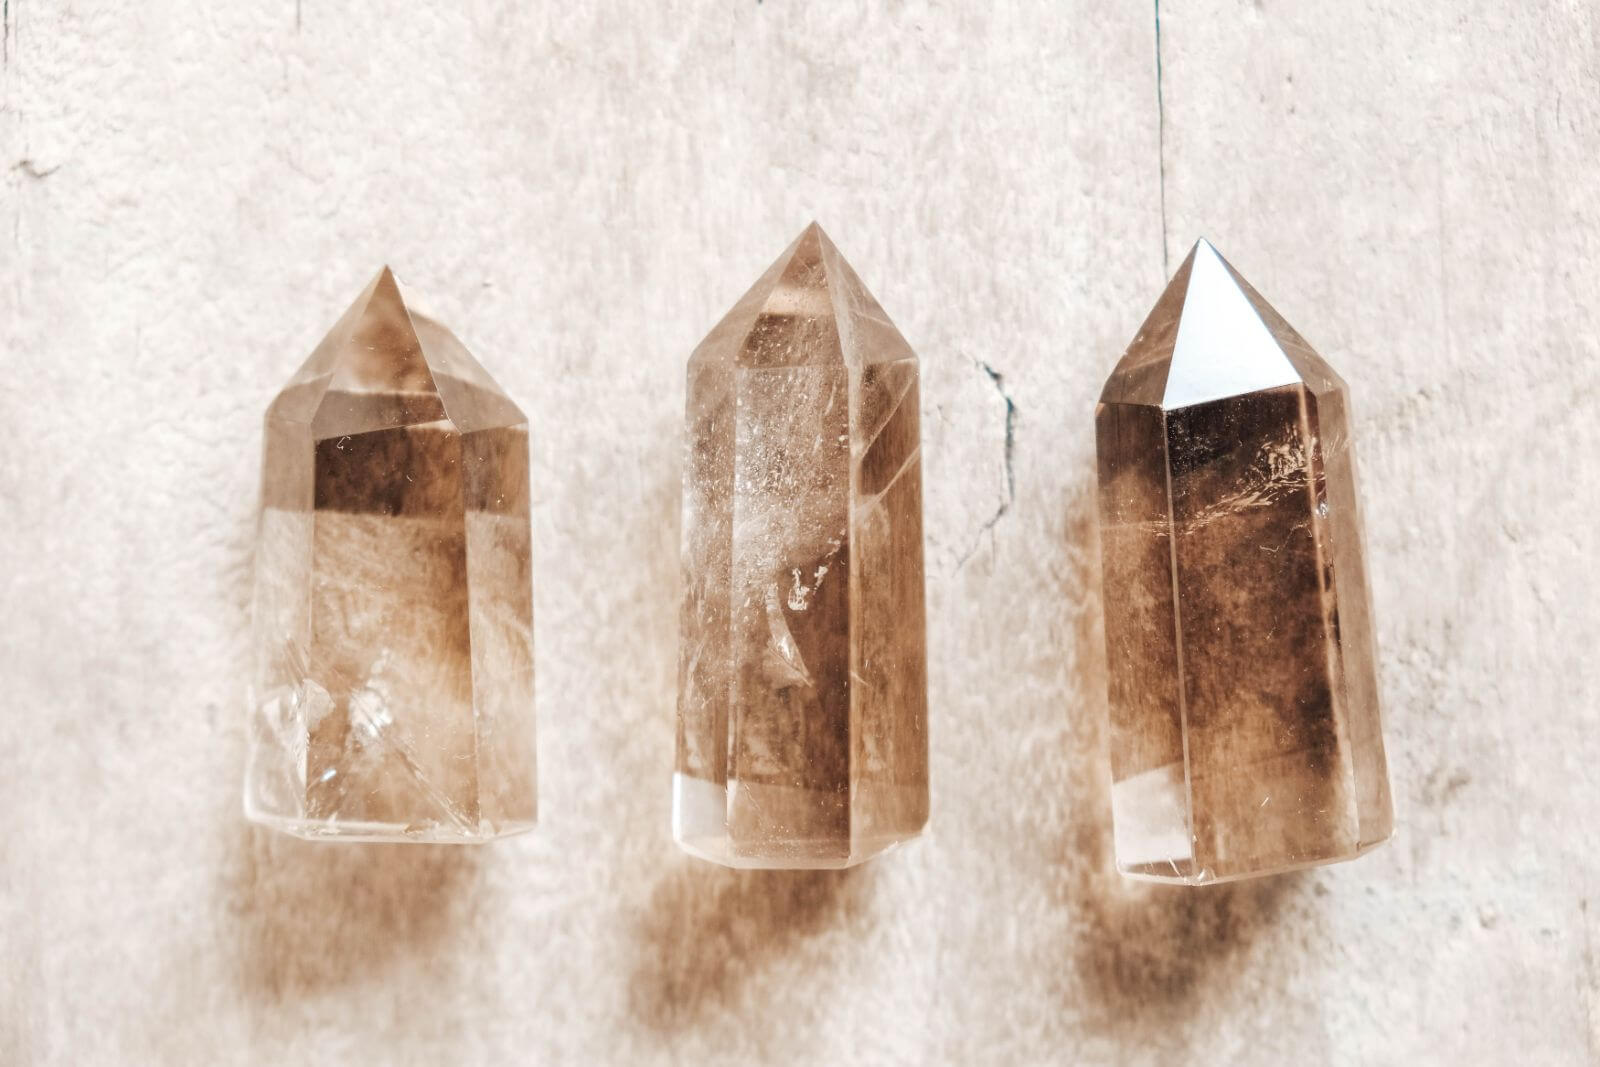 Smoky Quartz: Meaning, Healing Properties, And Uses